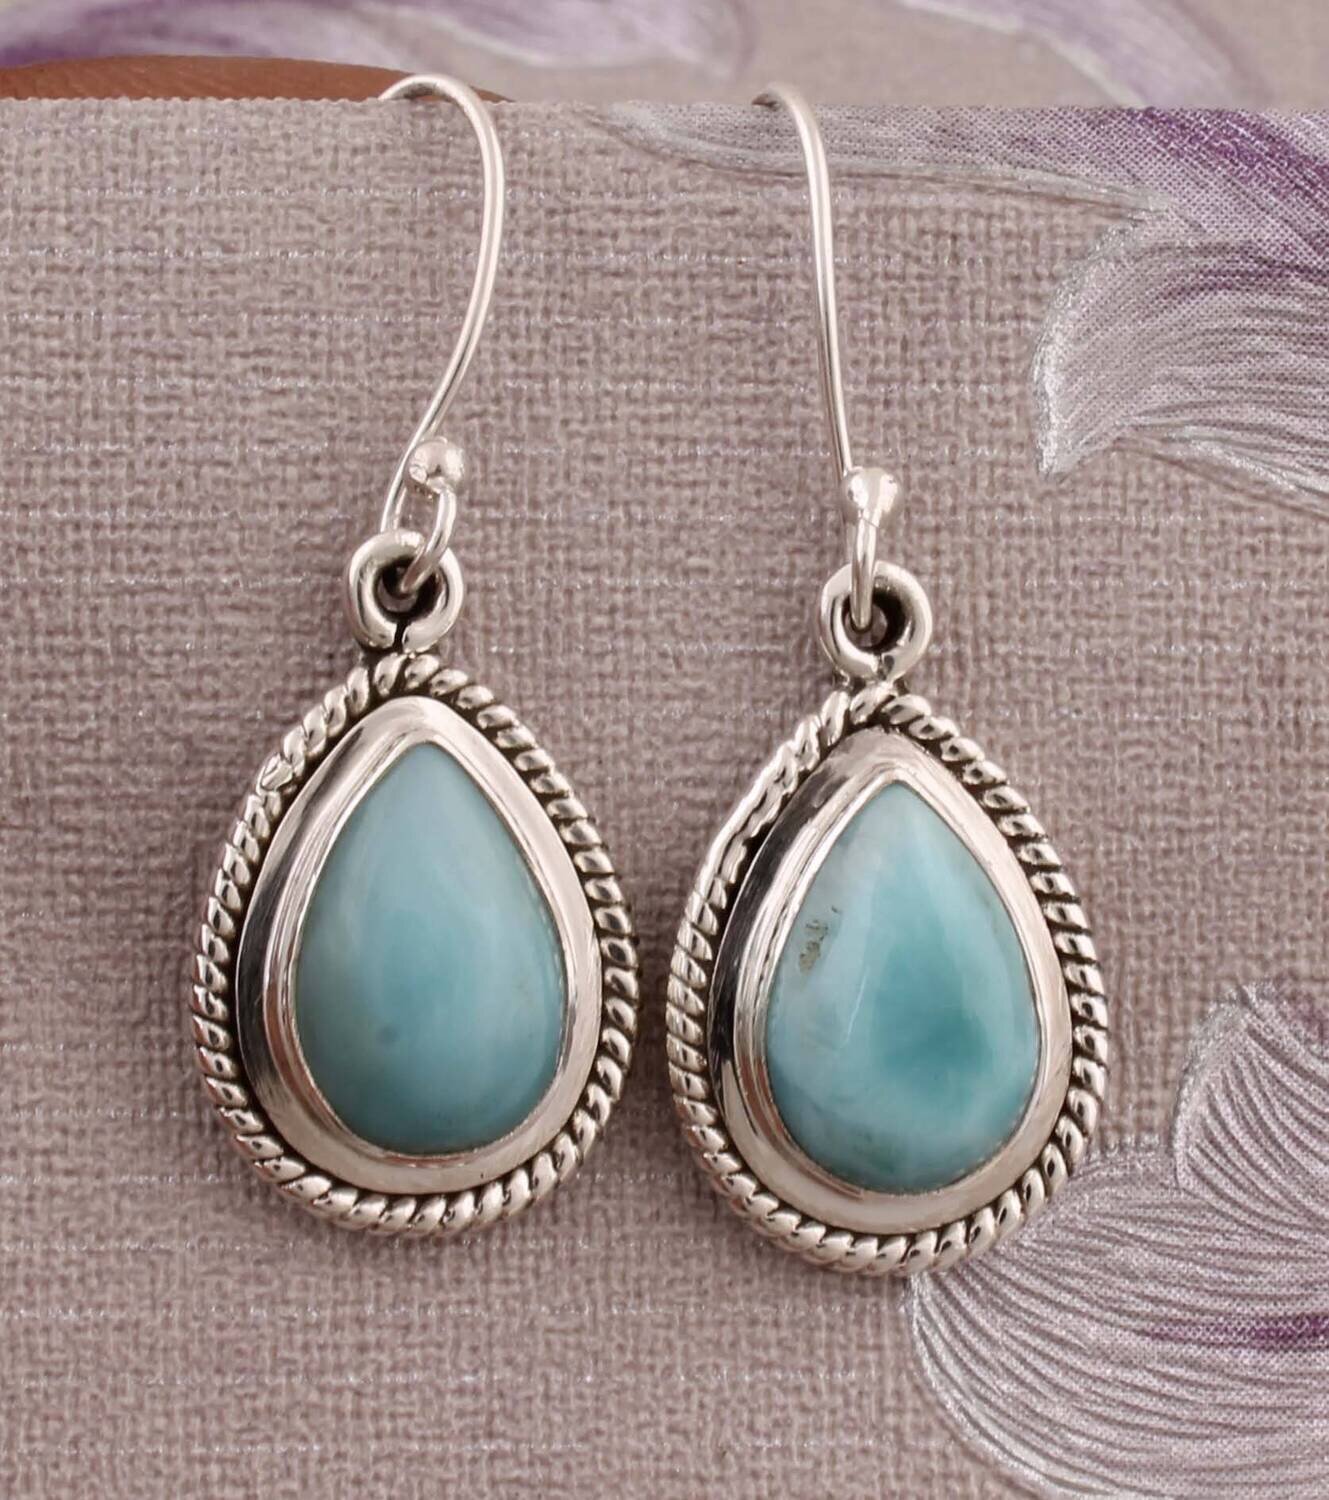 Larimar Pear Shape Earring With Natural Larimar Gemstone Earring Cabochon+Opaque  Stone Boho Earring 925 Silver Sterling Solid Earring